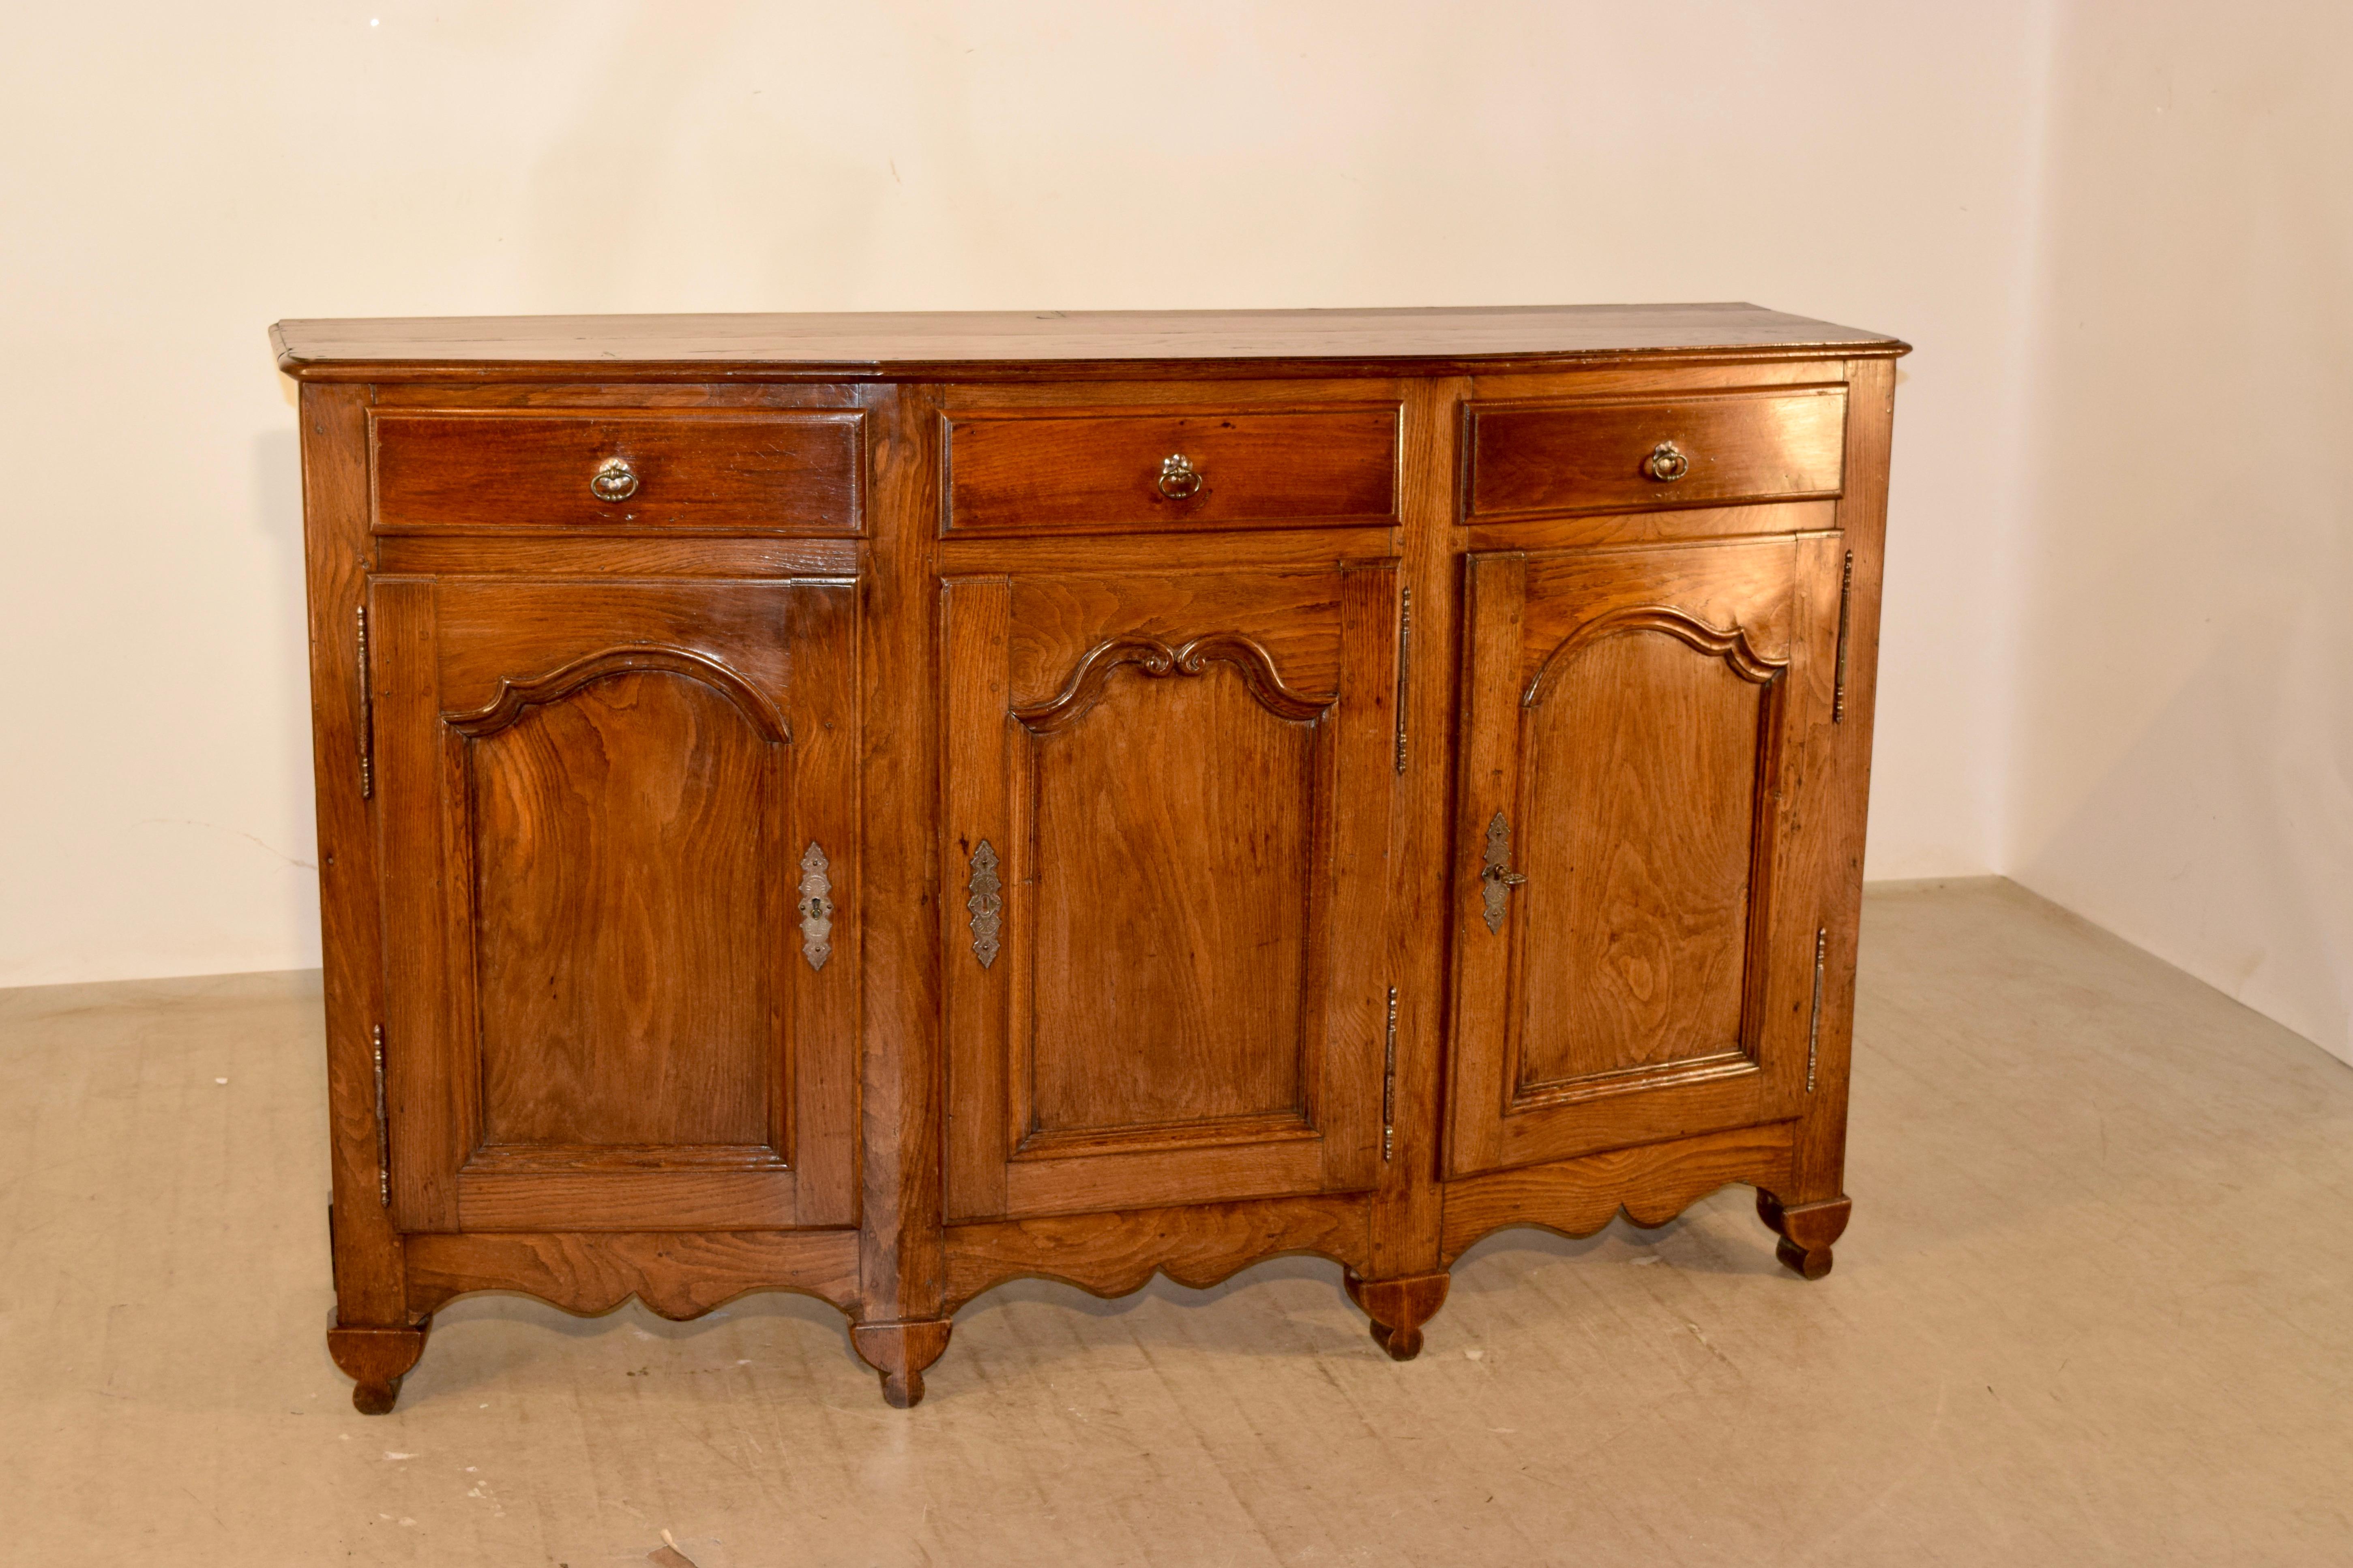 19th century oak enfilade from France in a wonderfully convex shape. The top has a beveled edge and follows down to simple sides. There are three drawers, all with beveled edge detail over three raised paneled doors in the front, which open to